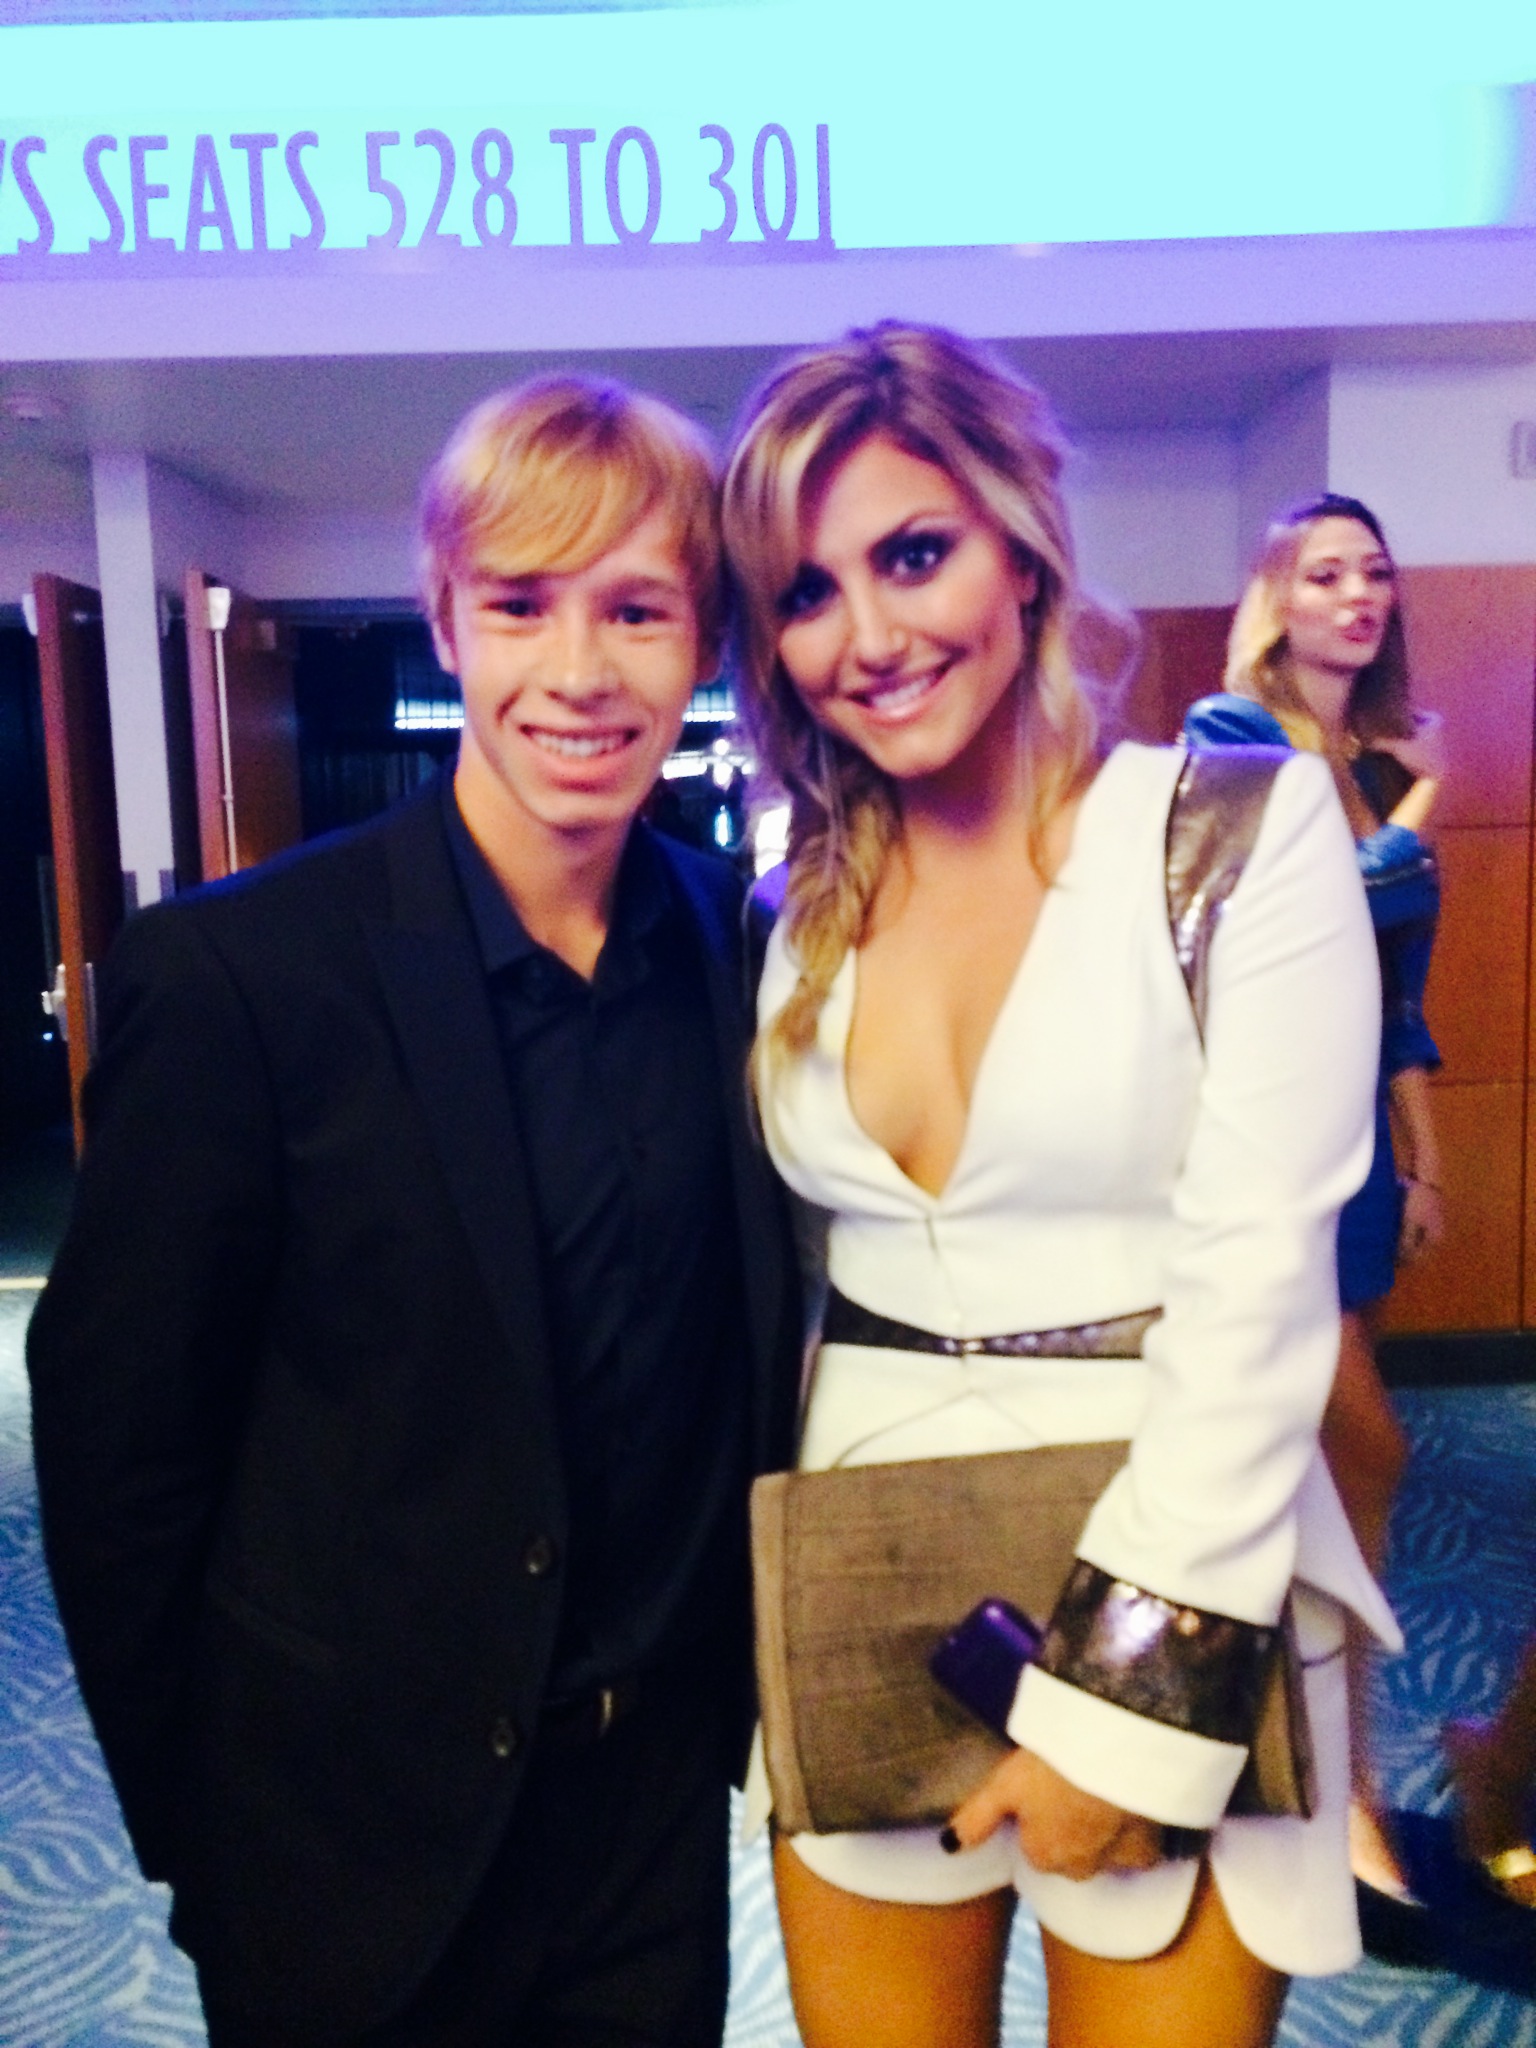 with Cassie Scerbo at the People's Choice Awards